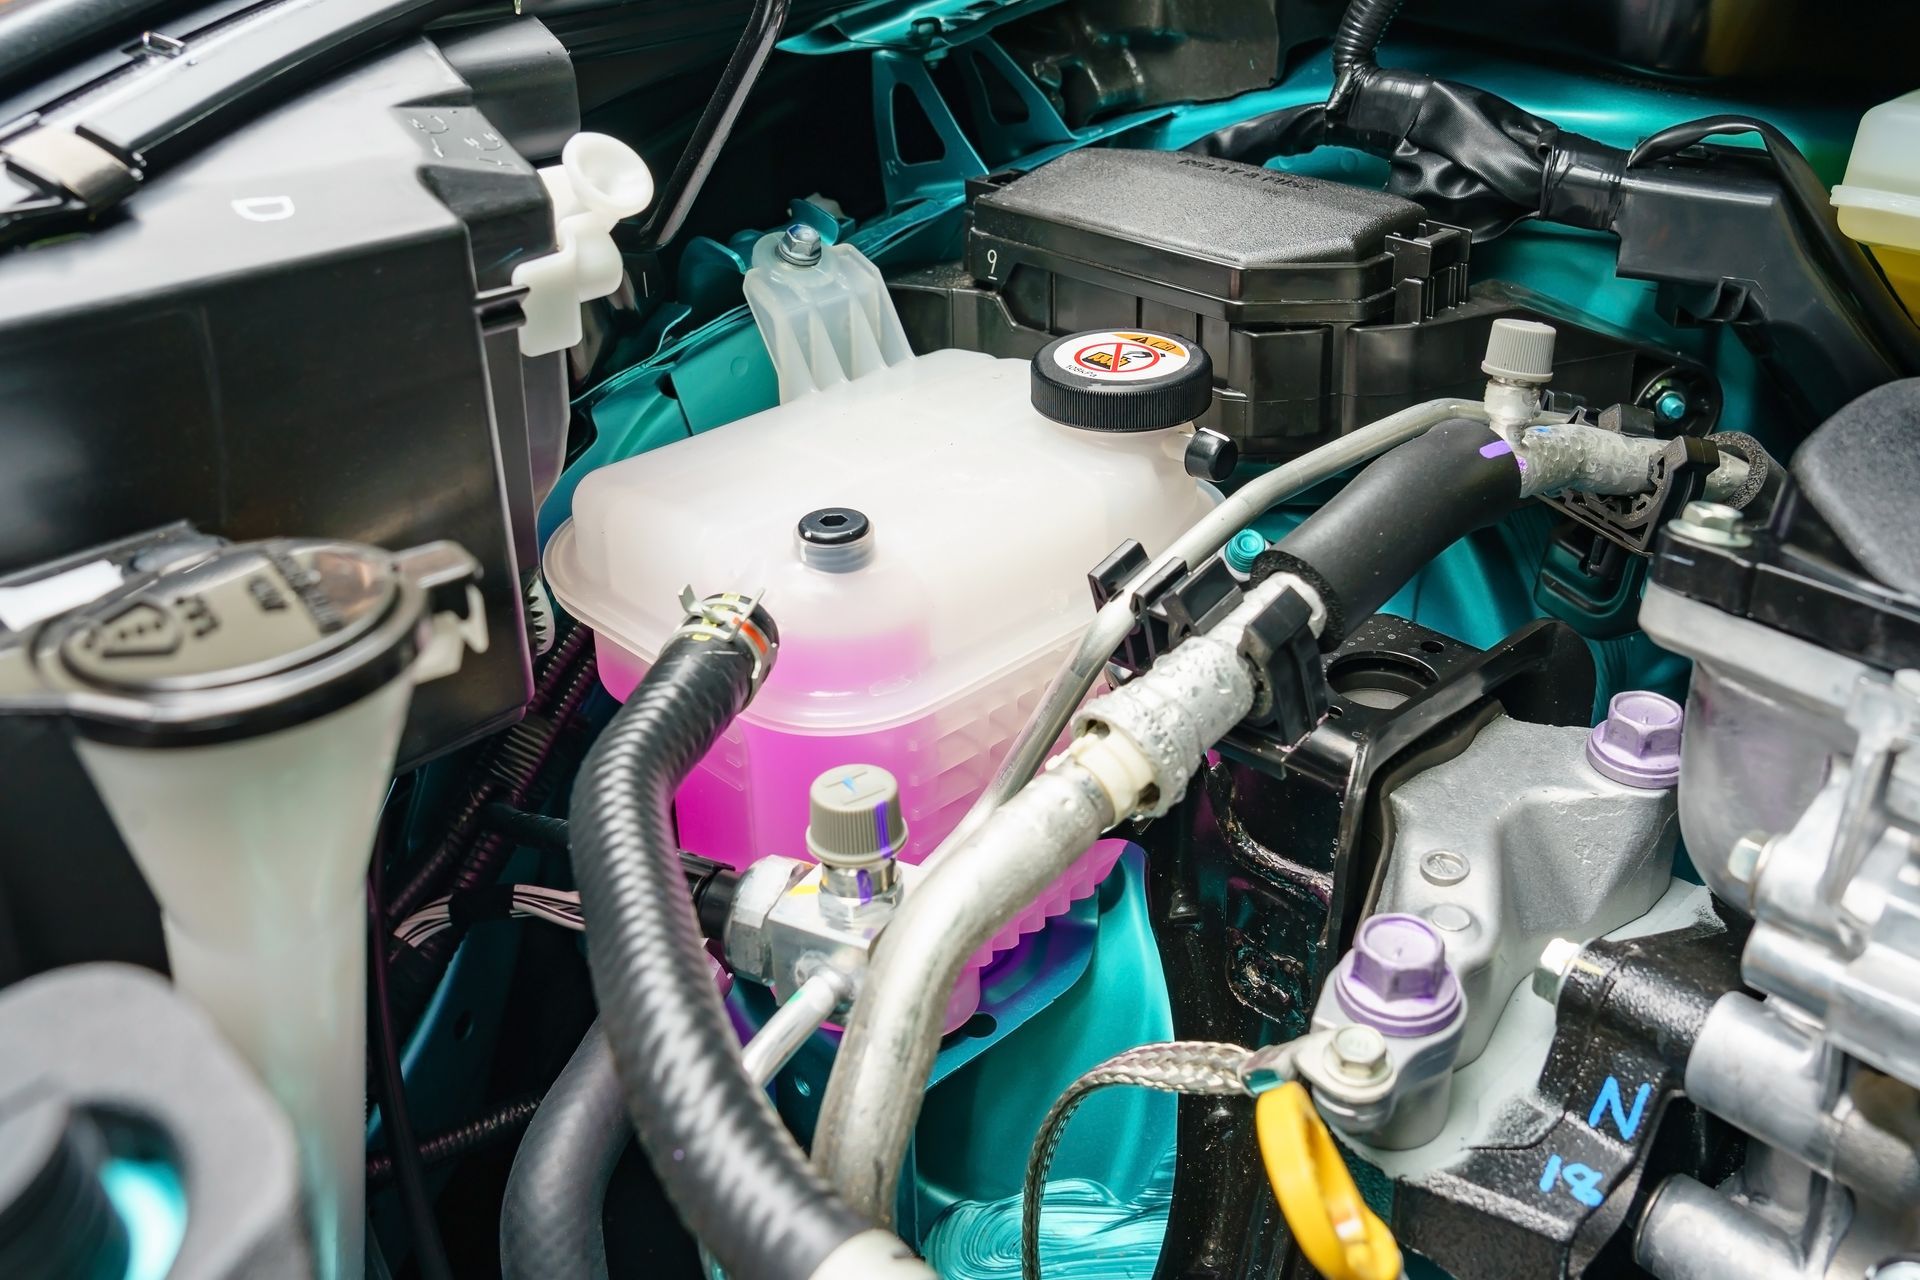 Cooling System Service at ﻿Northuis Auto Repair﻿ in ﻿Jenison, MI﻿